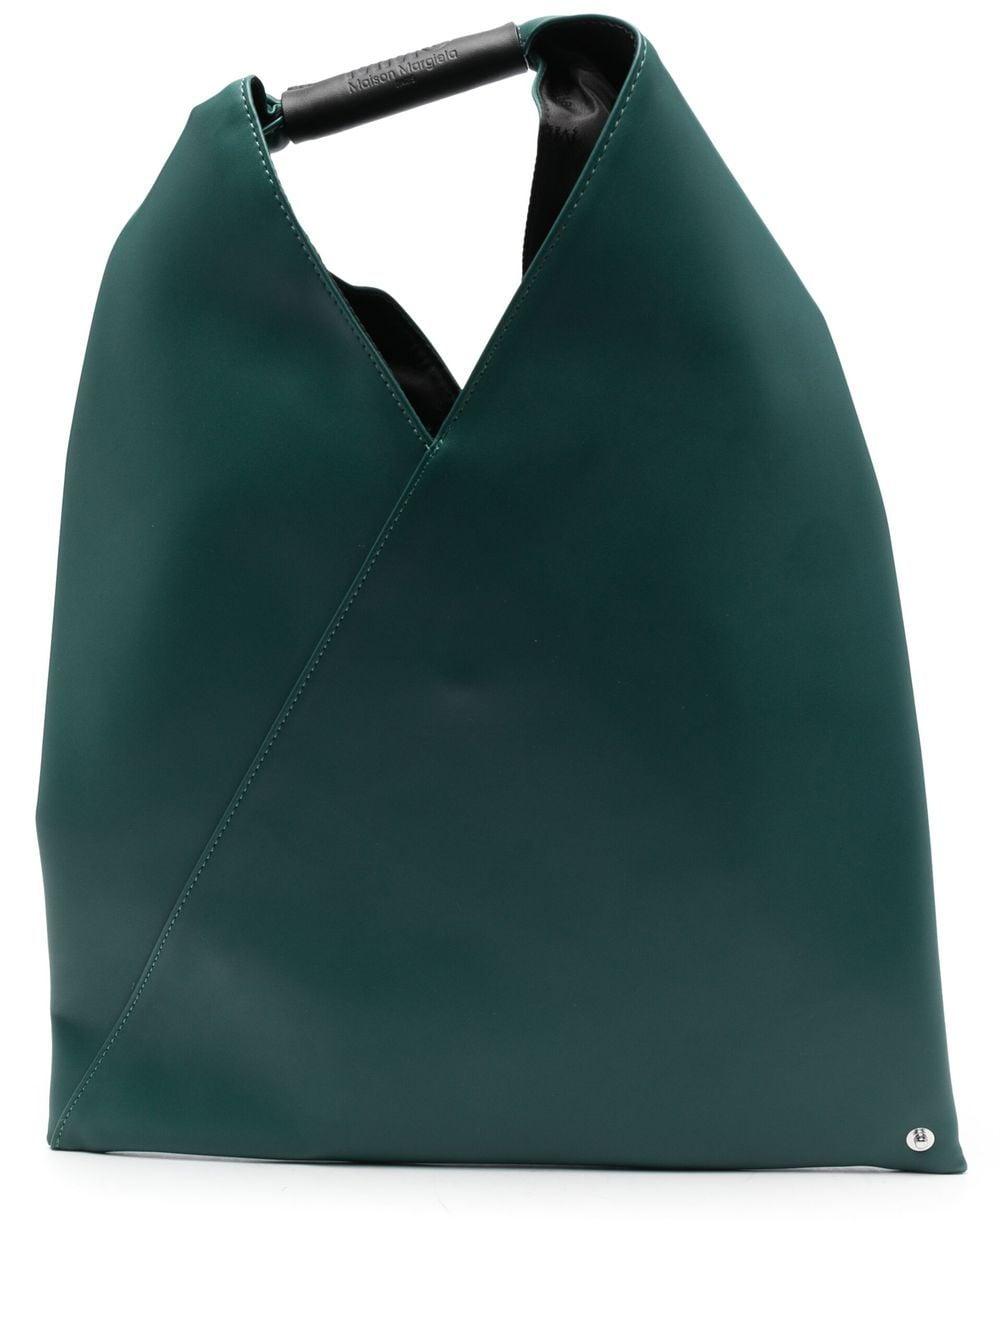 MM6 by Maison Martin Margiela Small Japanese Tote Bag in Green | Lyst